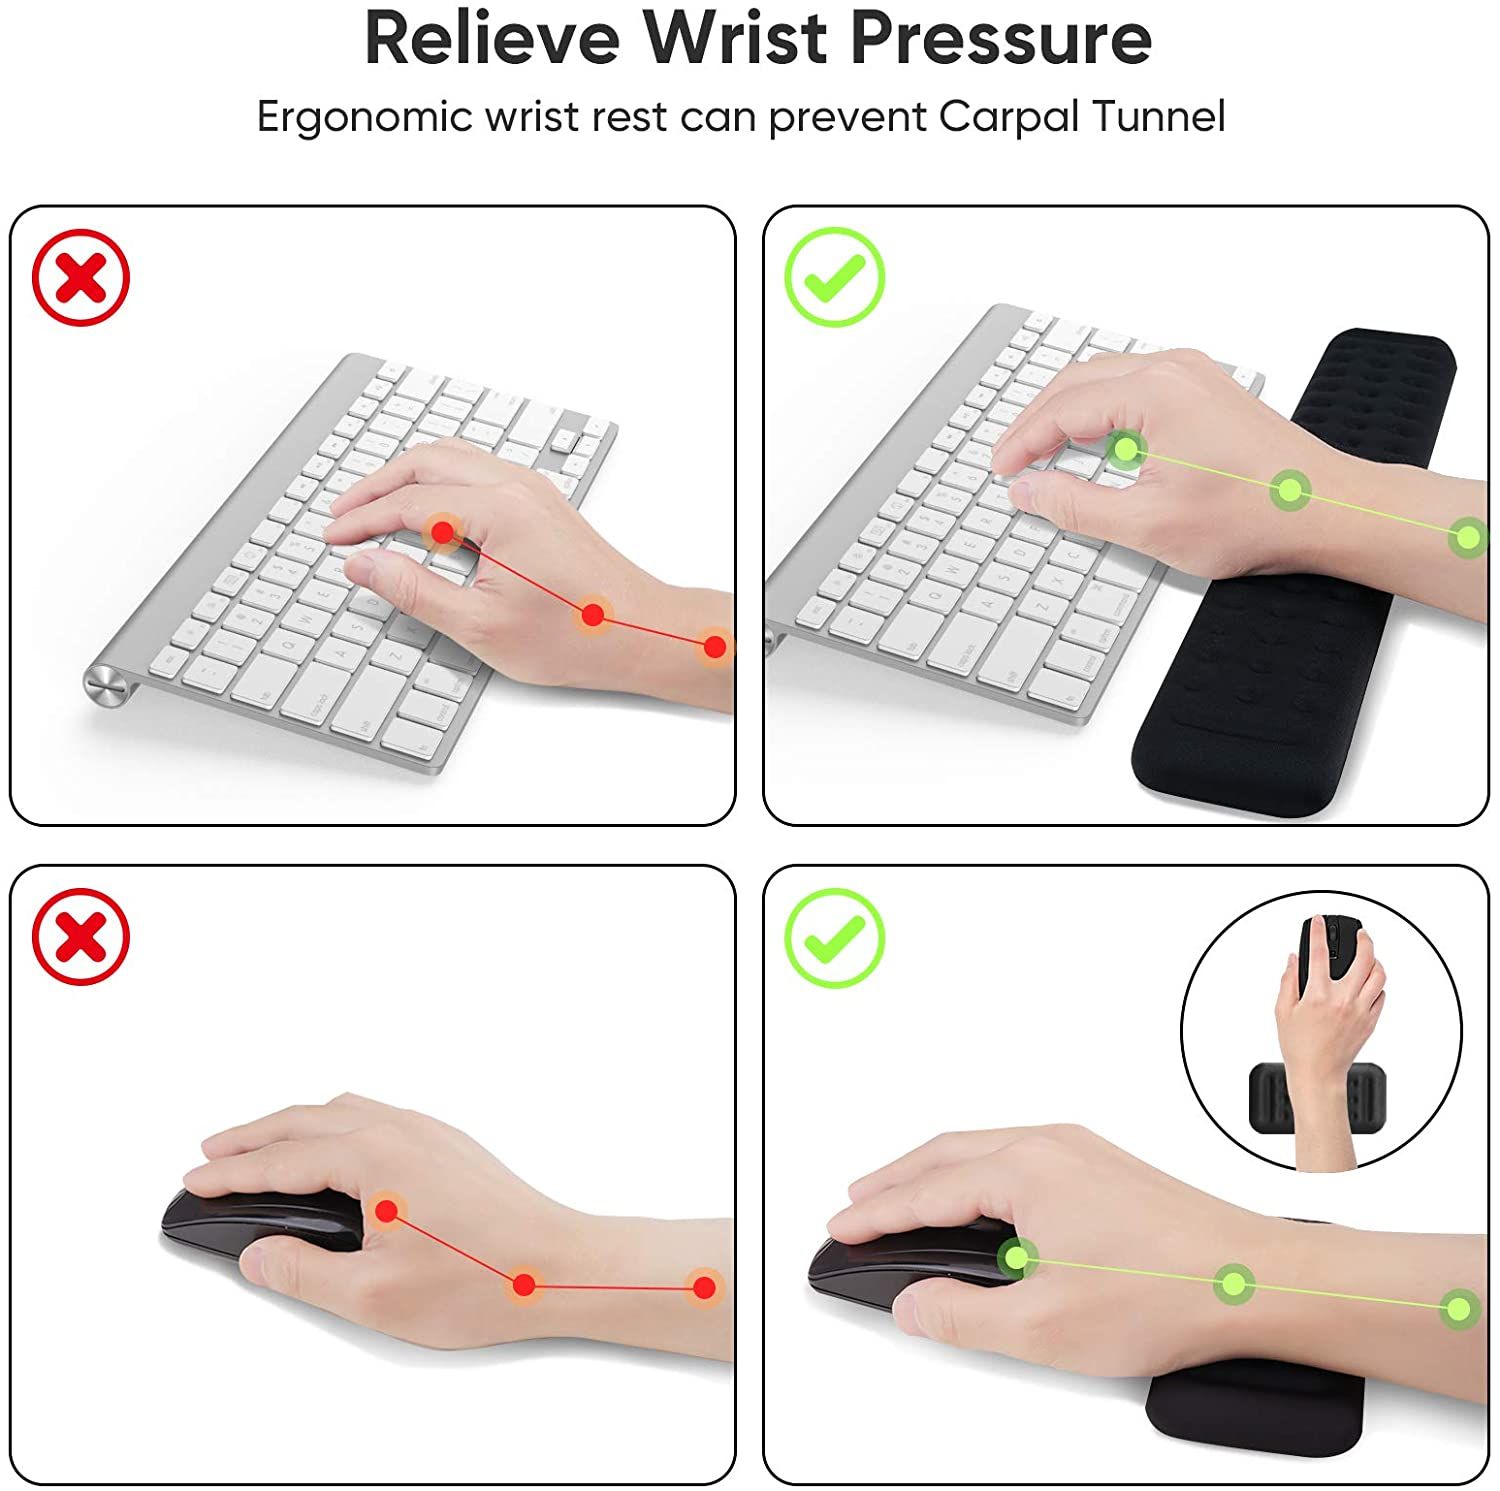 Wrist rest relieving pressure to wrists.